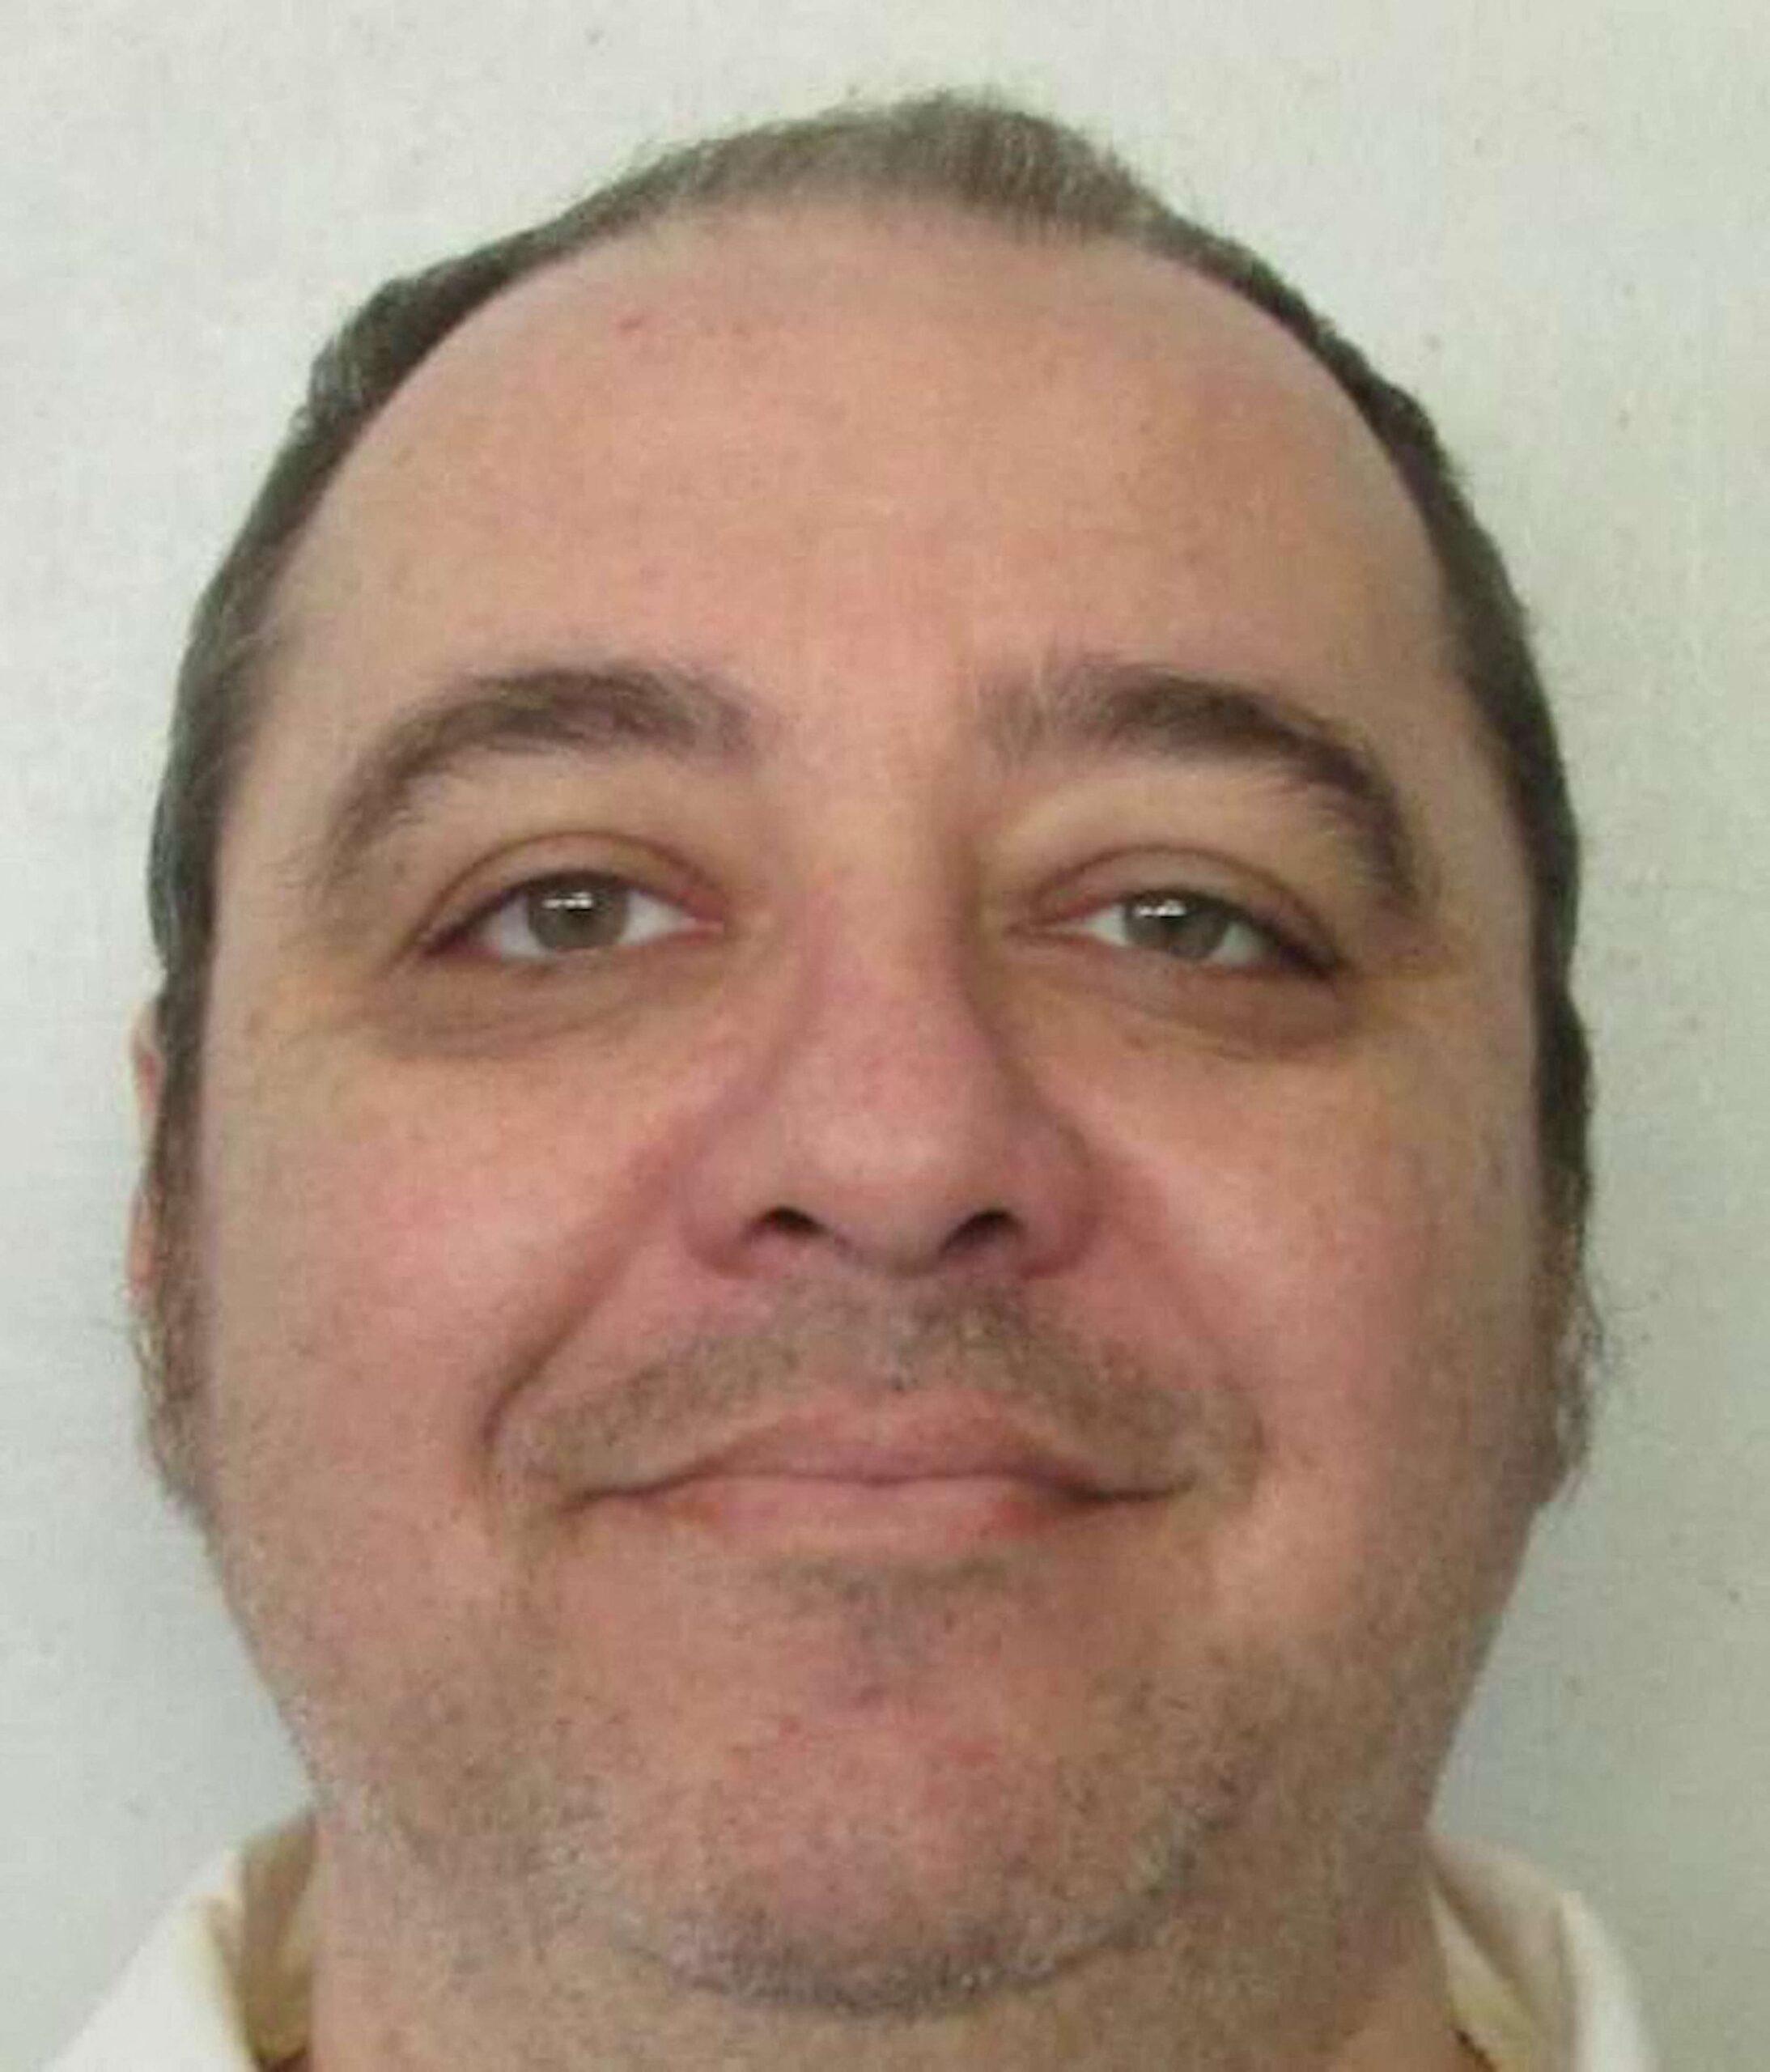 Alabama State Set To Execute Prisoner By Nitrogen Suffocation, First Ever In The U.S.